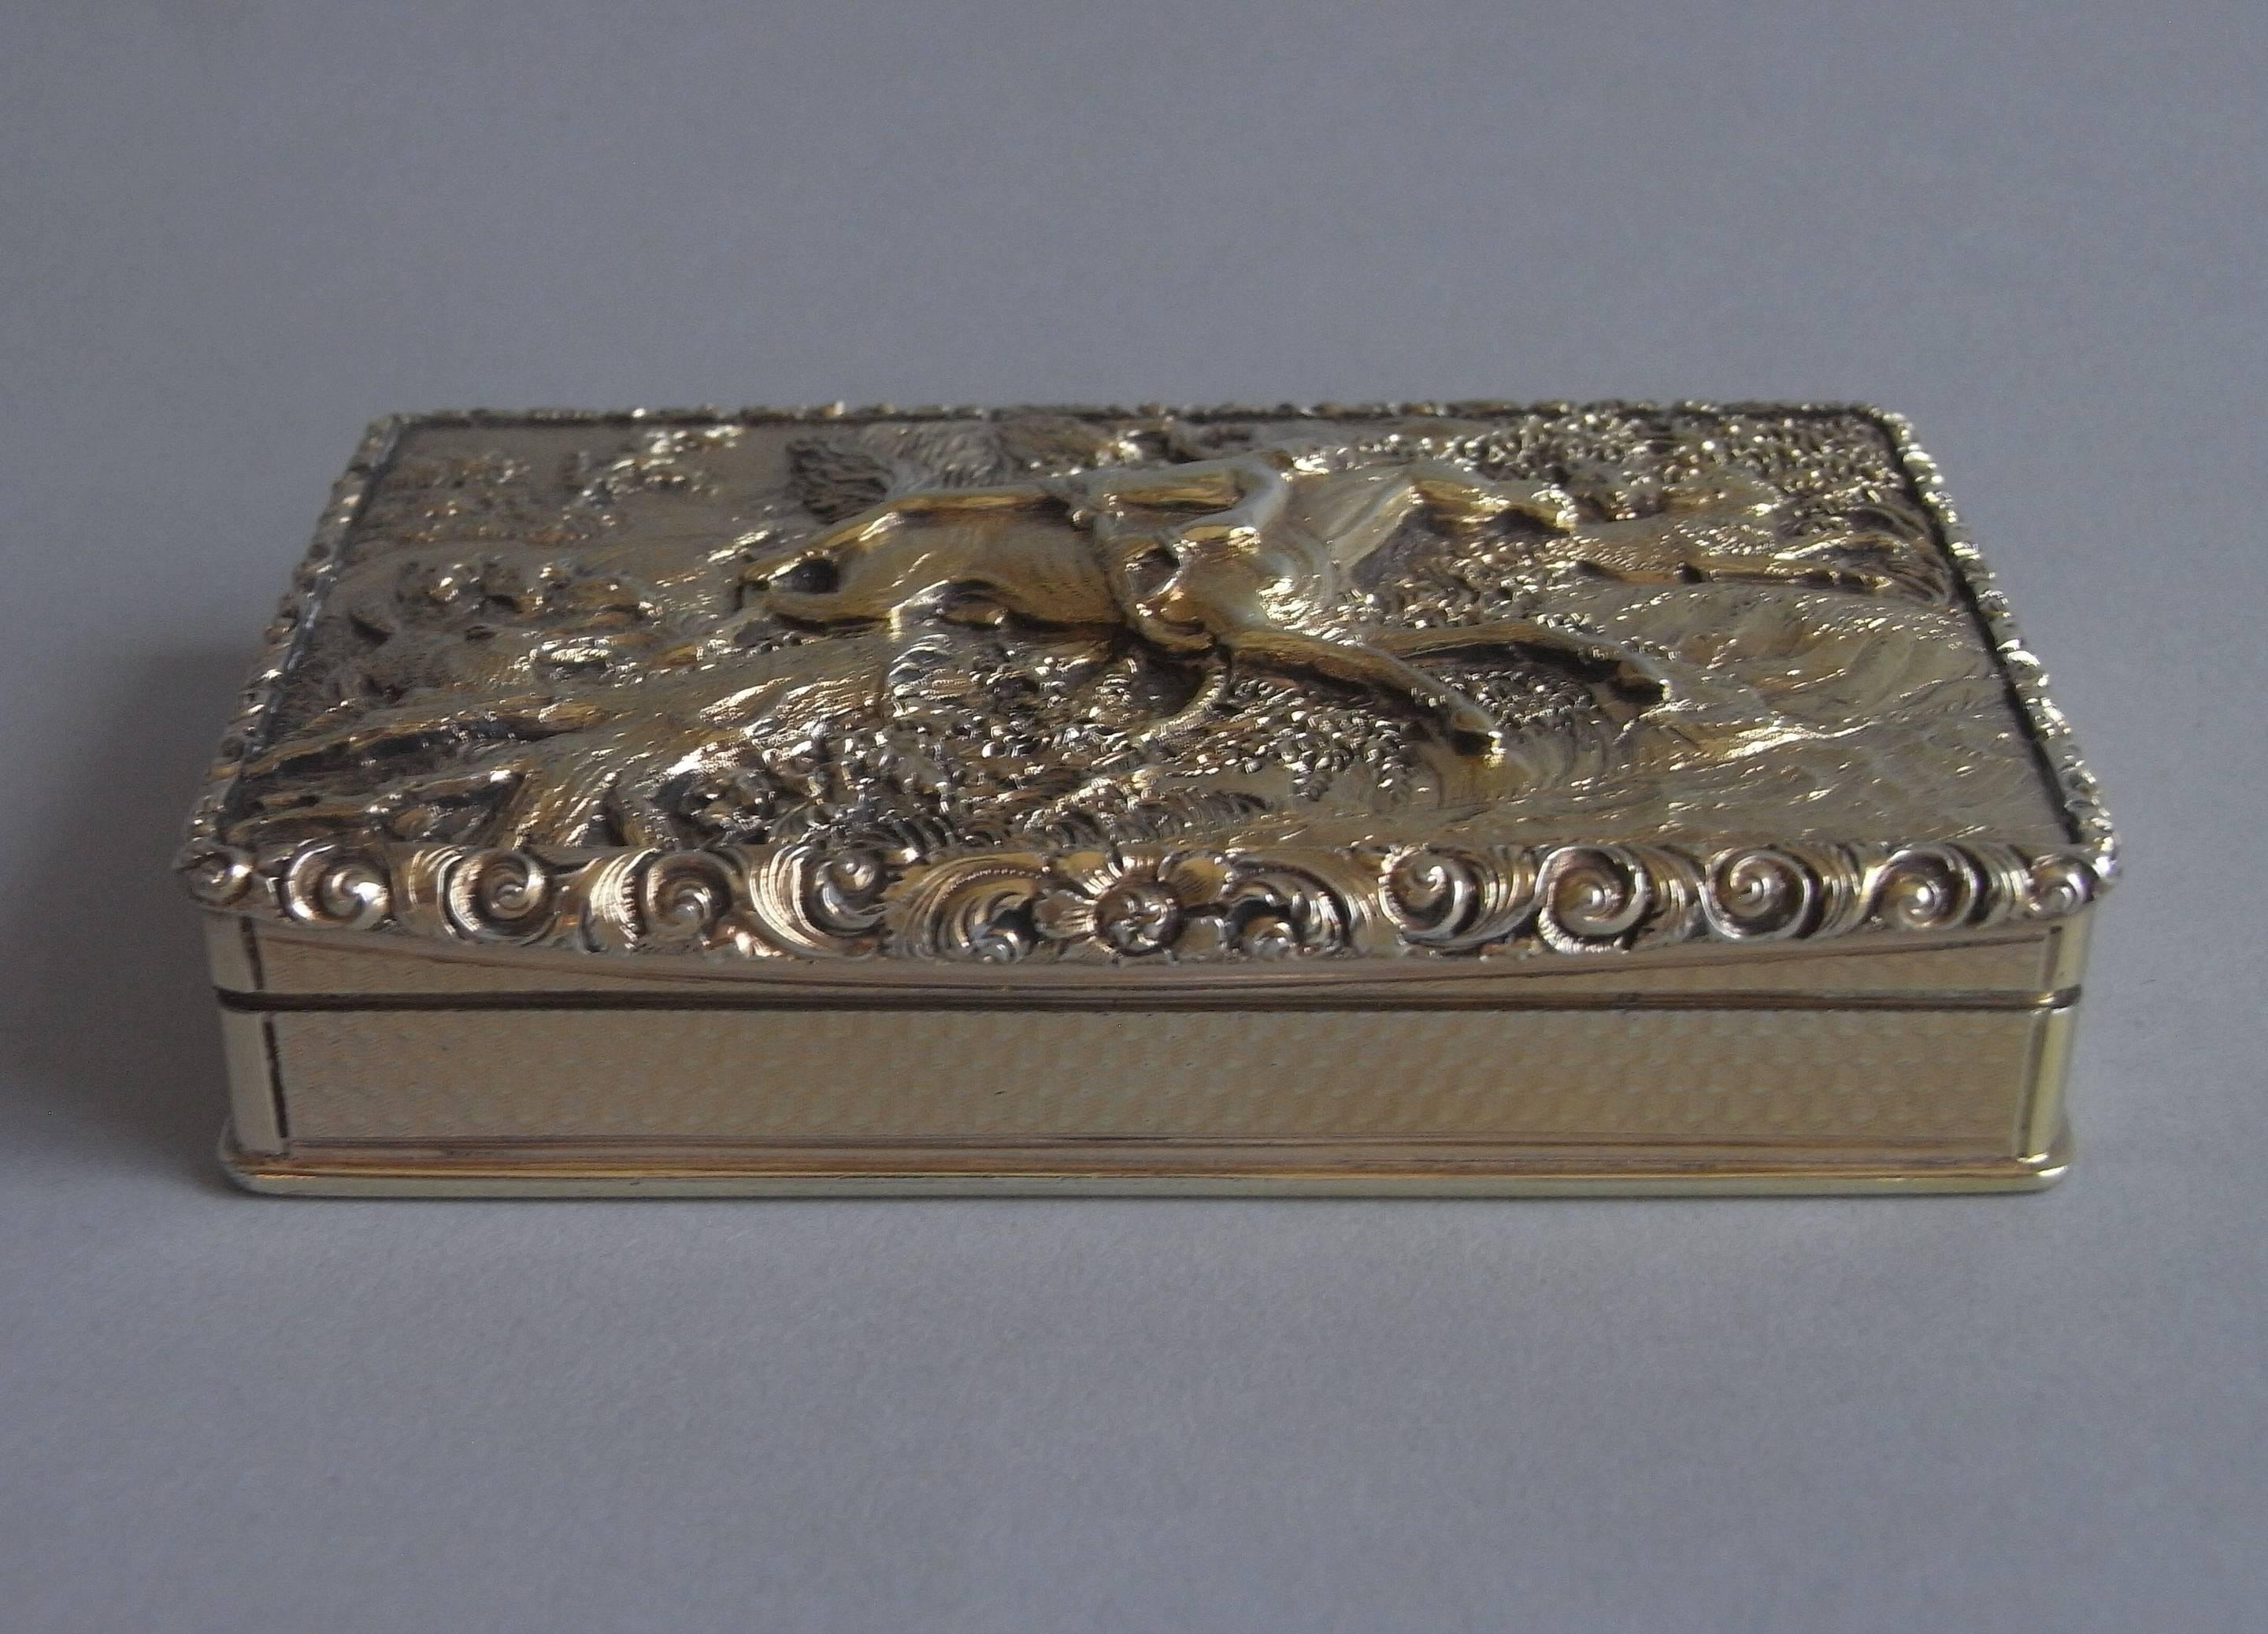 THE MAZEPPA BOX - A very rare and exceptional William IV Silver Gilt Table Snuff Box made in Birmingham in 1833 by Nathaniel Mills.